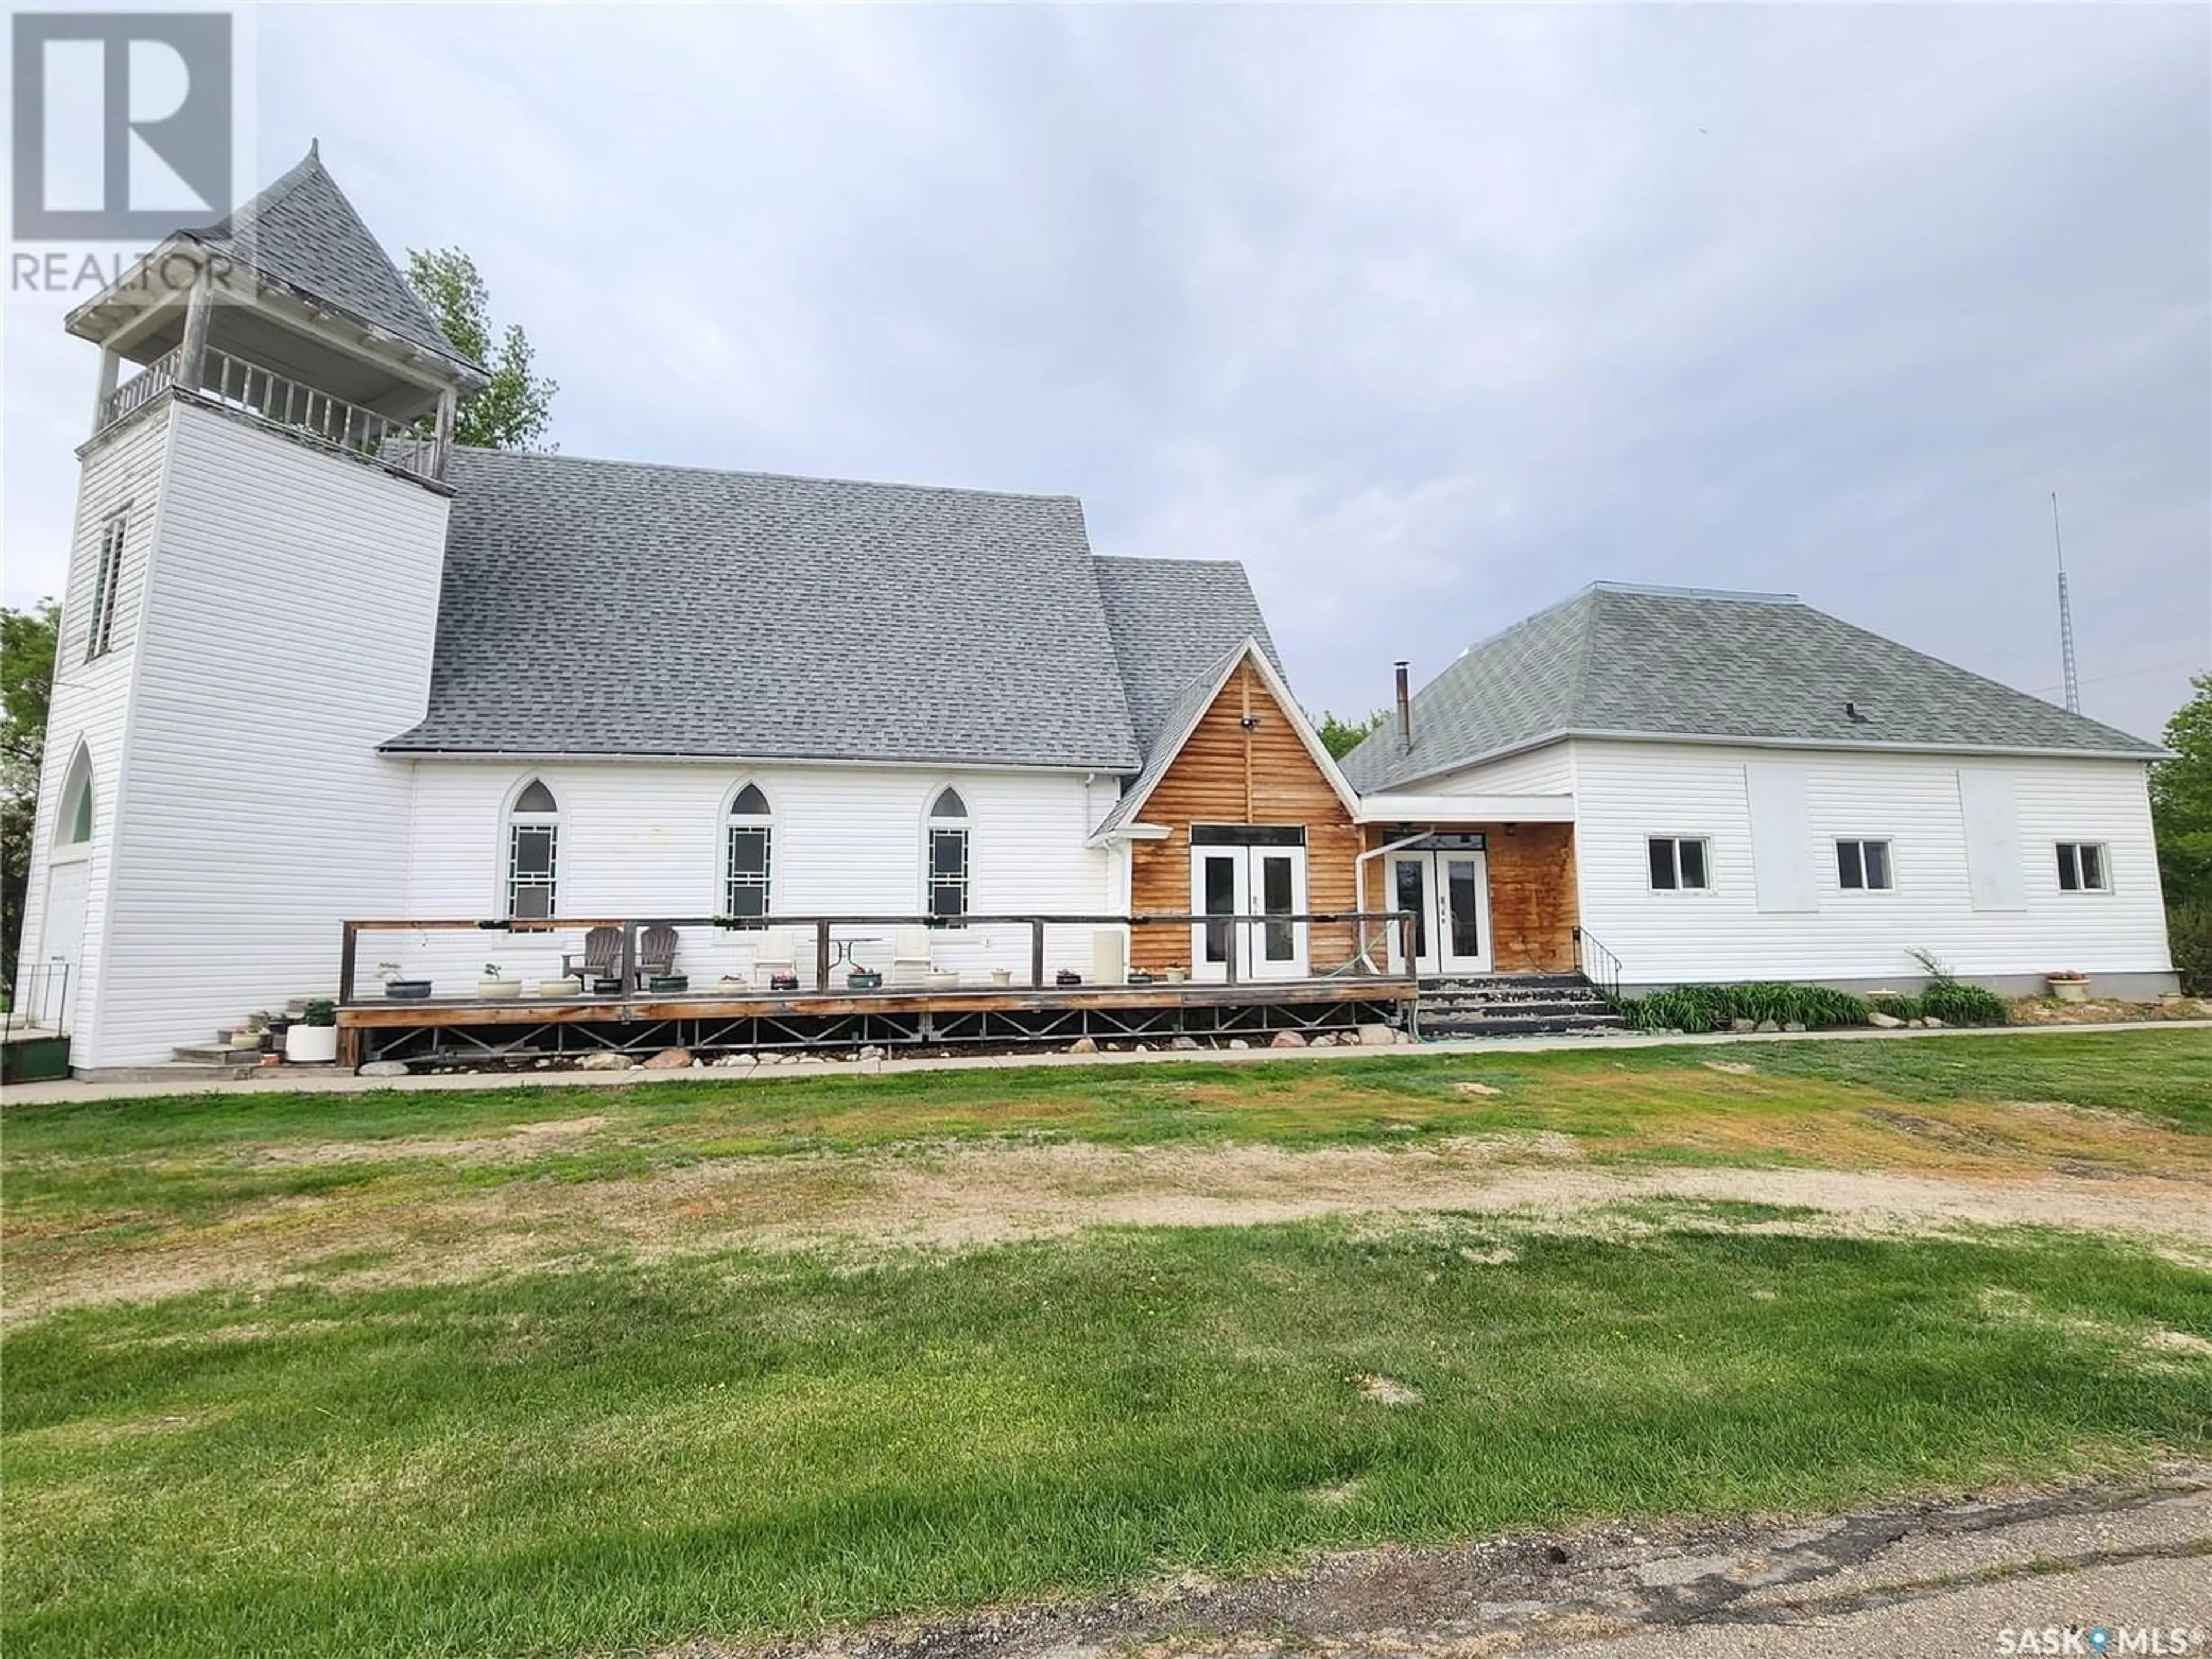 Home with stone exterior material for 400 1st STREET, Lang Saskatchewan S0G2W0